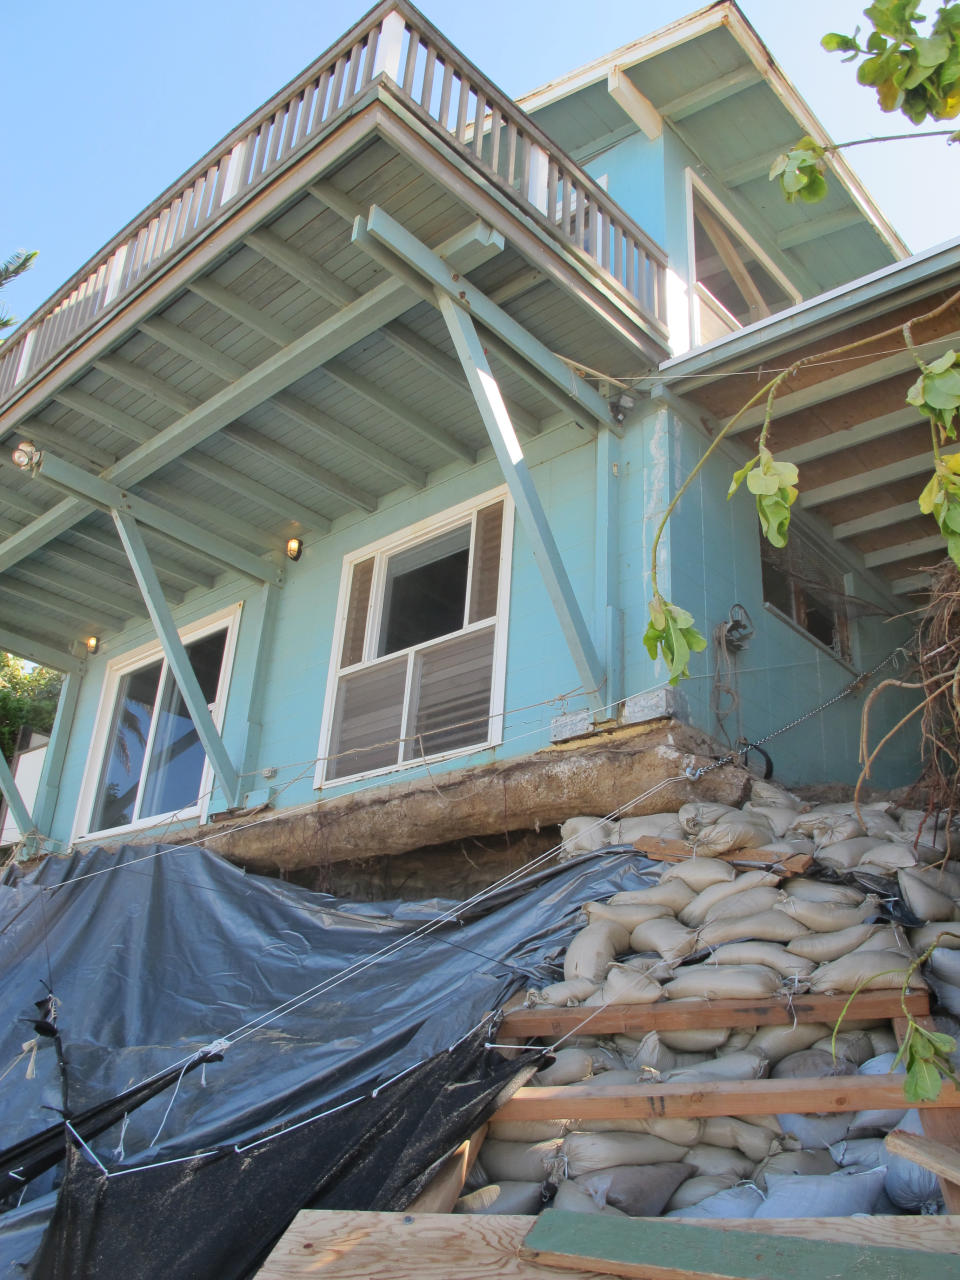 Sandbags are piled up in front of a house damaged by severe beach erosion in the Rocky Point neighborhood of Oahu's North Shore in Haleiwa, Hawaii on Tuesday, Dec. 31, 2013. Some property owners want to be able to install a seawall or something similar to protect their property, but scientists say doing so could lead the sand on the nearby coastline _ including Sunset Beach, home to some of the world’s top surfing contests _ to disappear. (AP Photo/Audrey McAvoy)